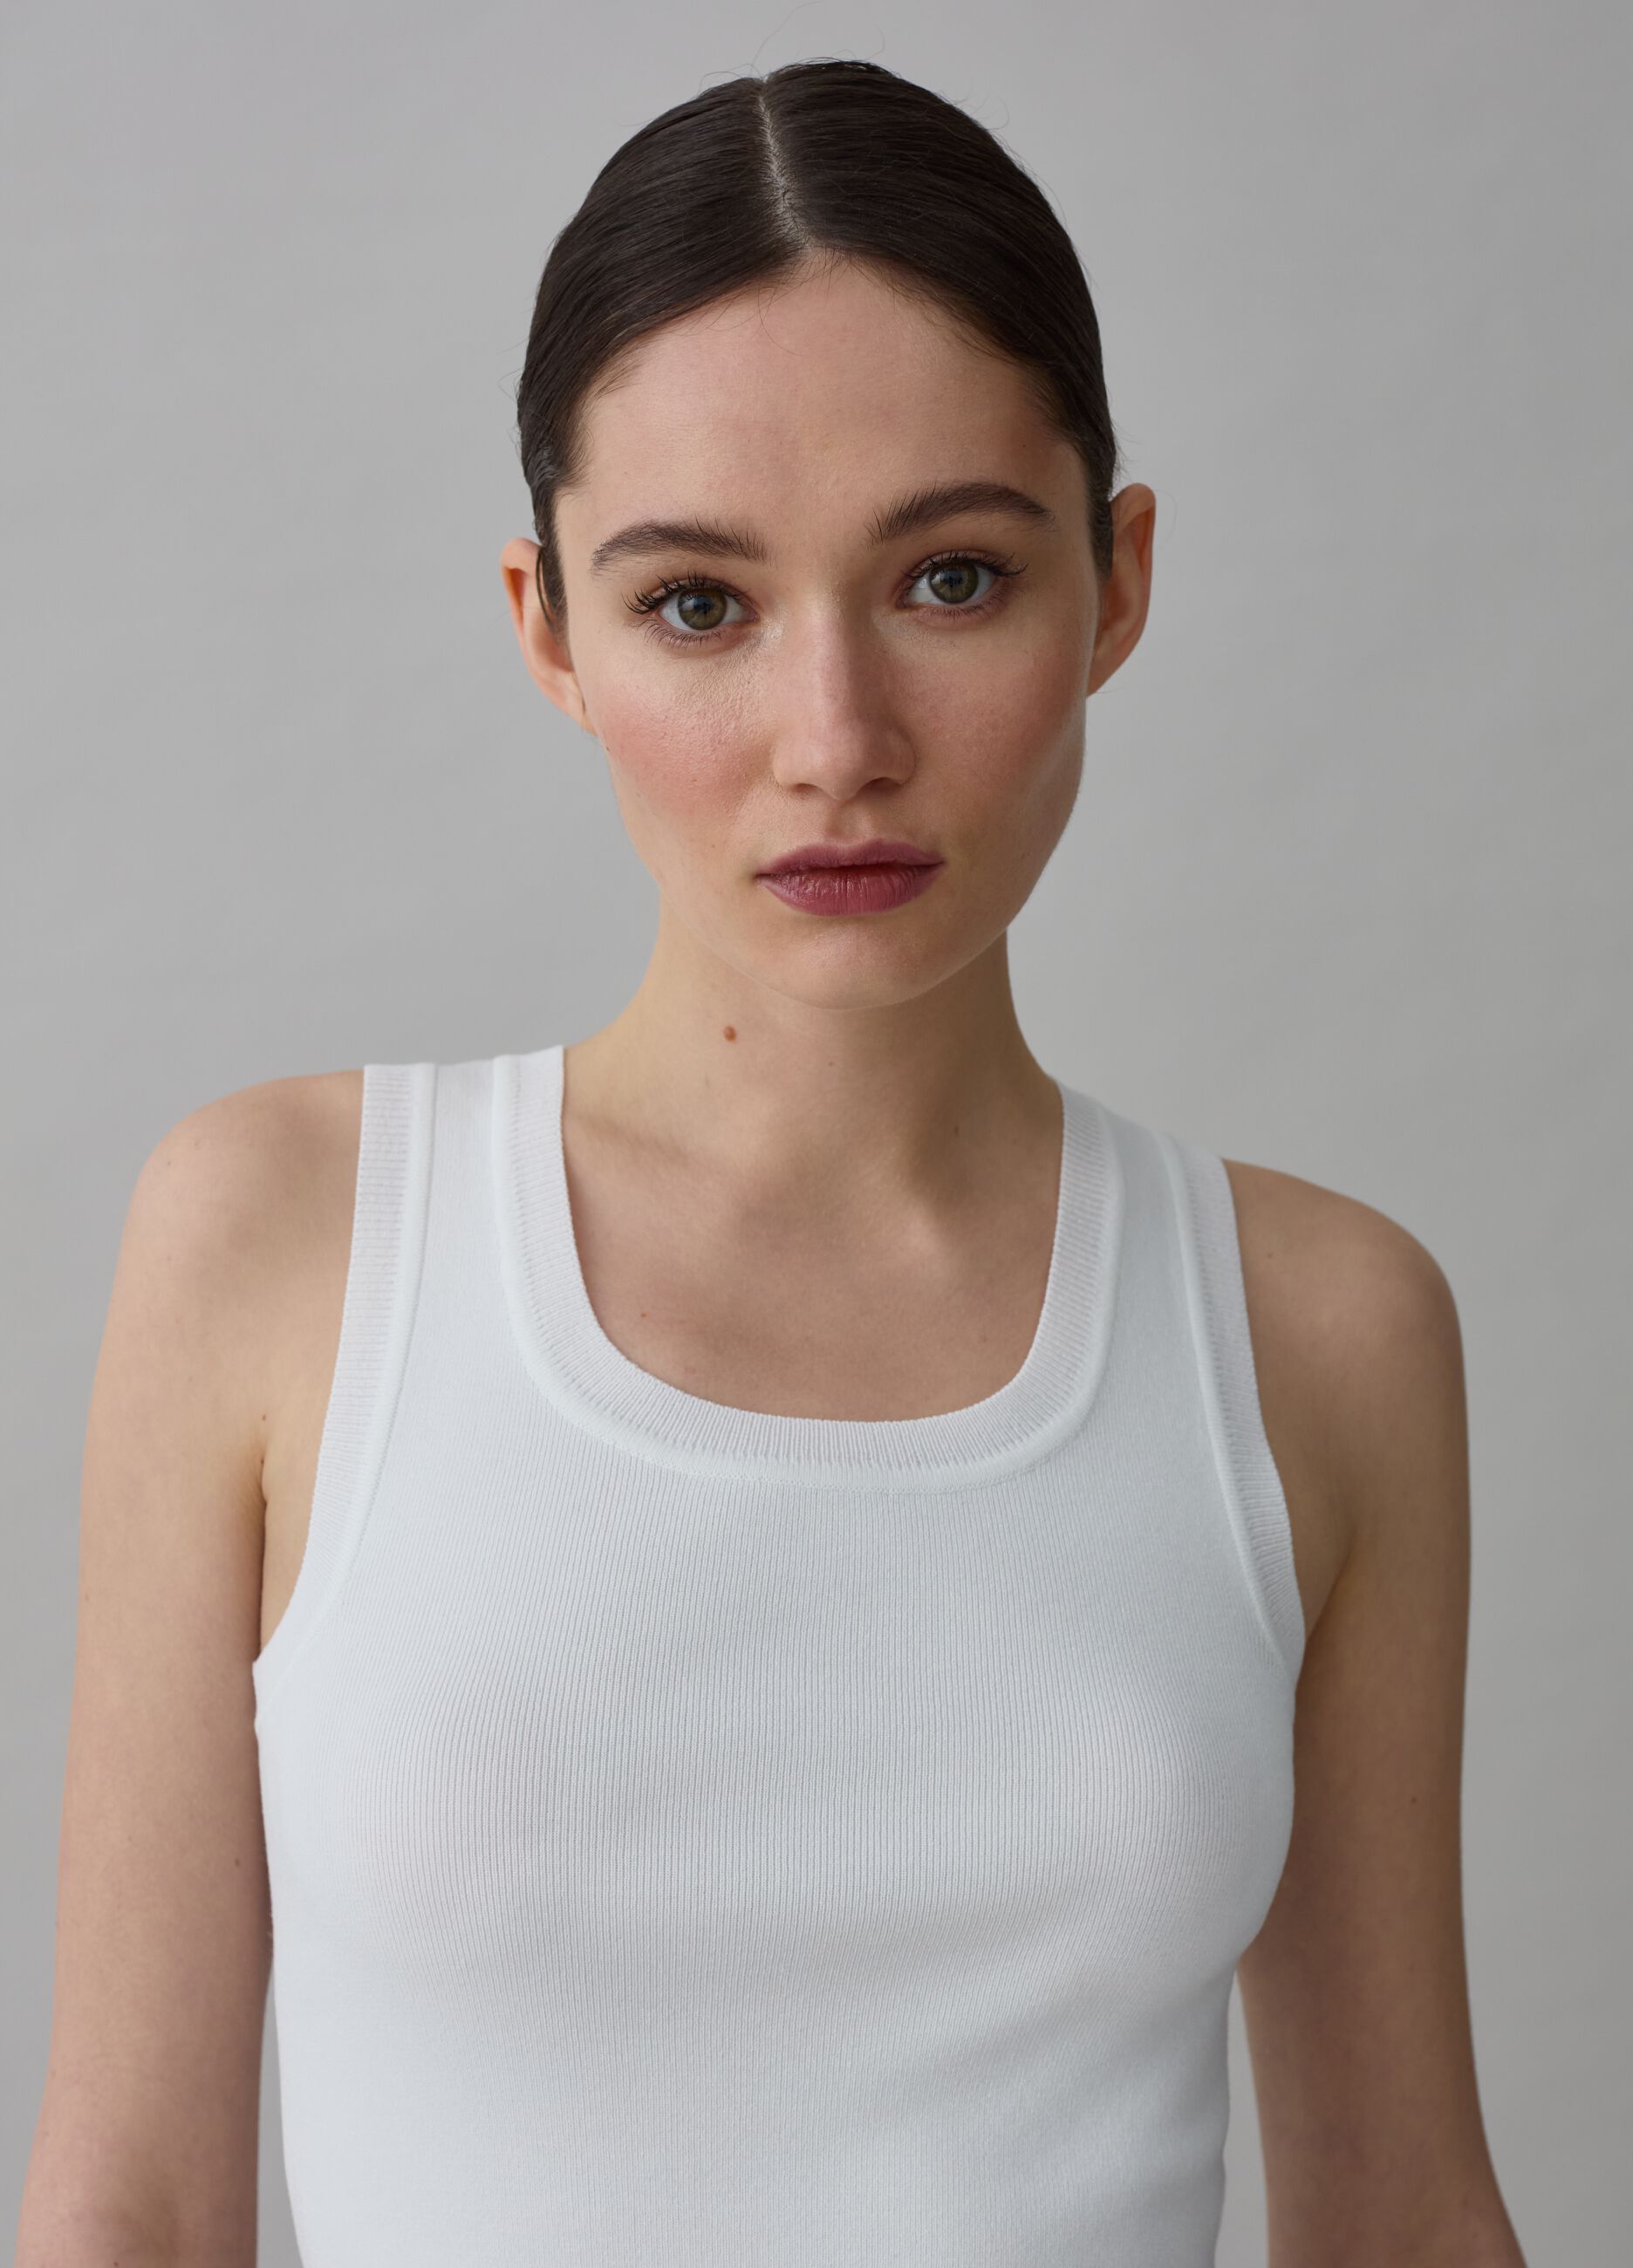 Ribbed tank top with round neckline